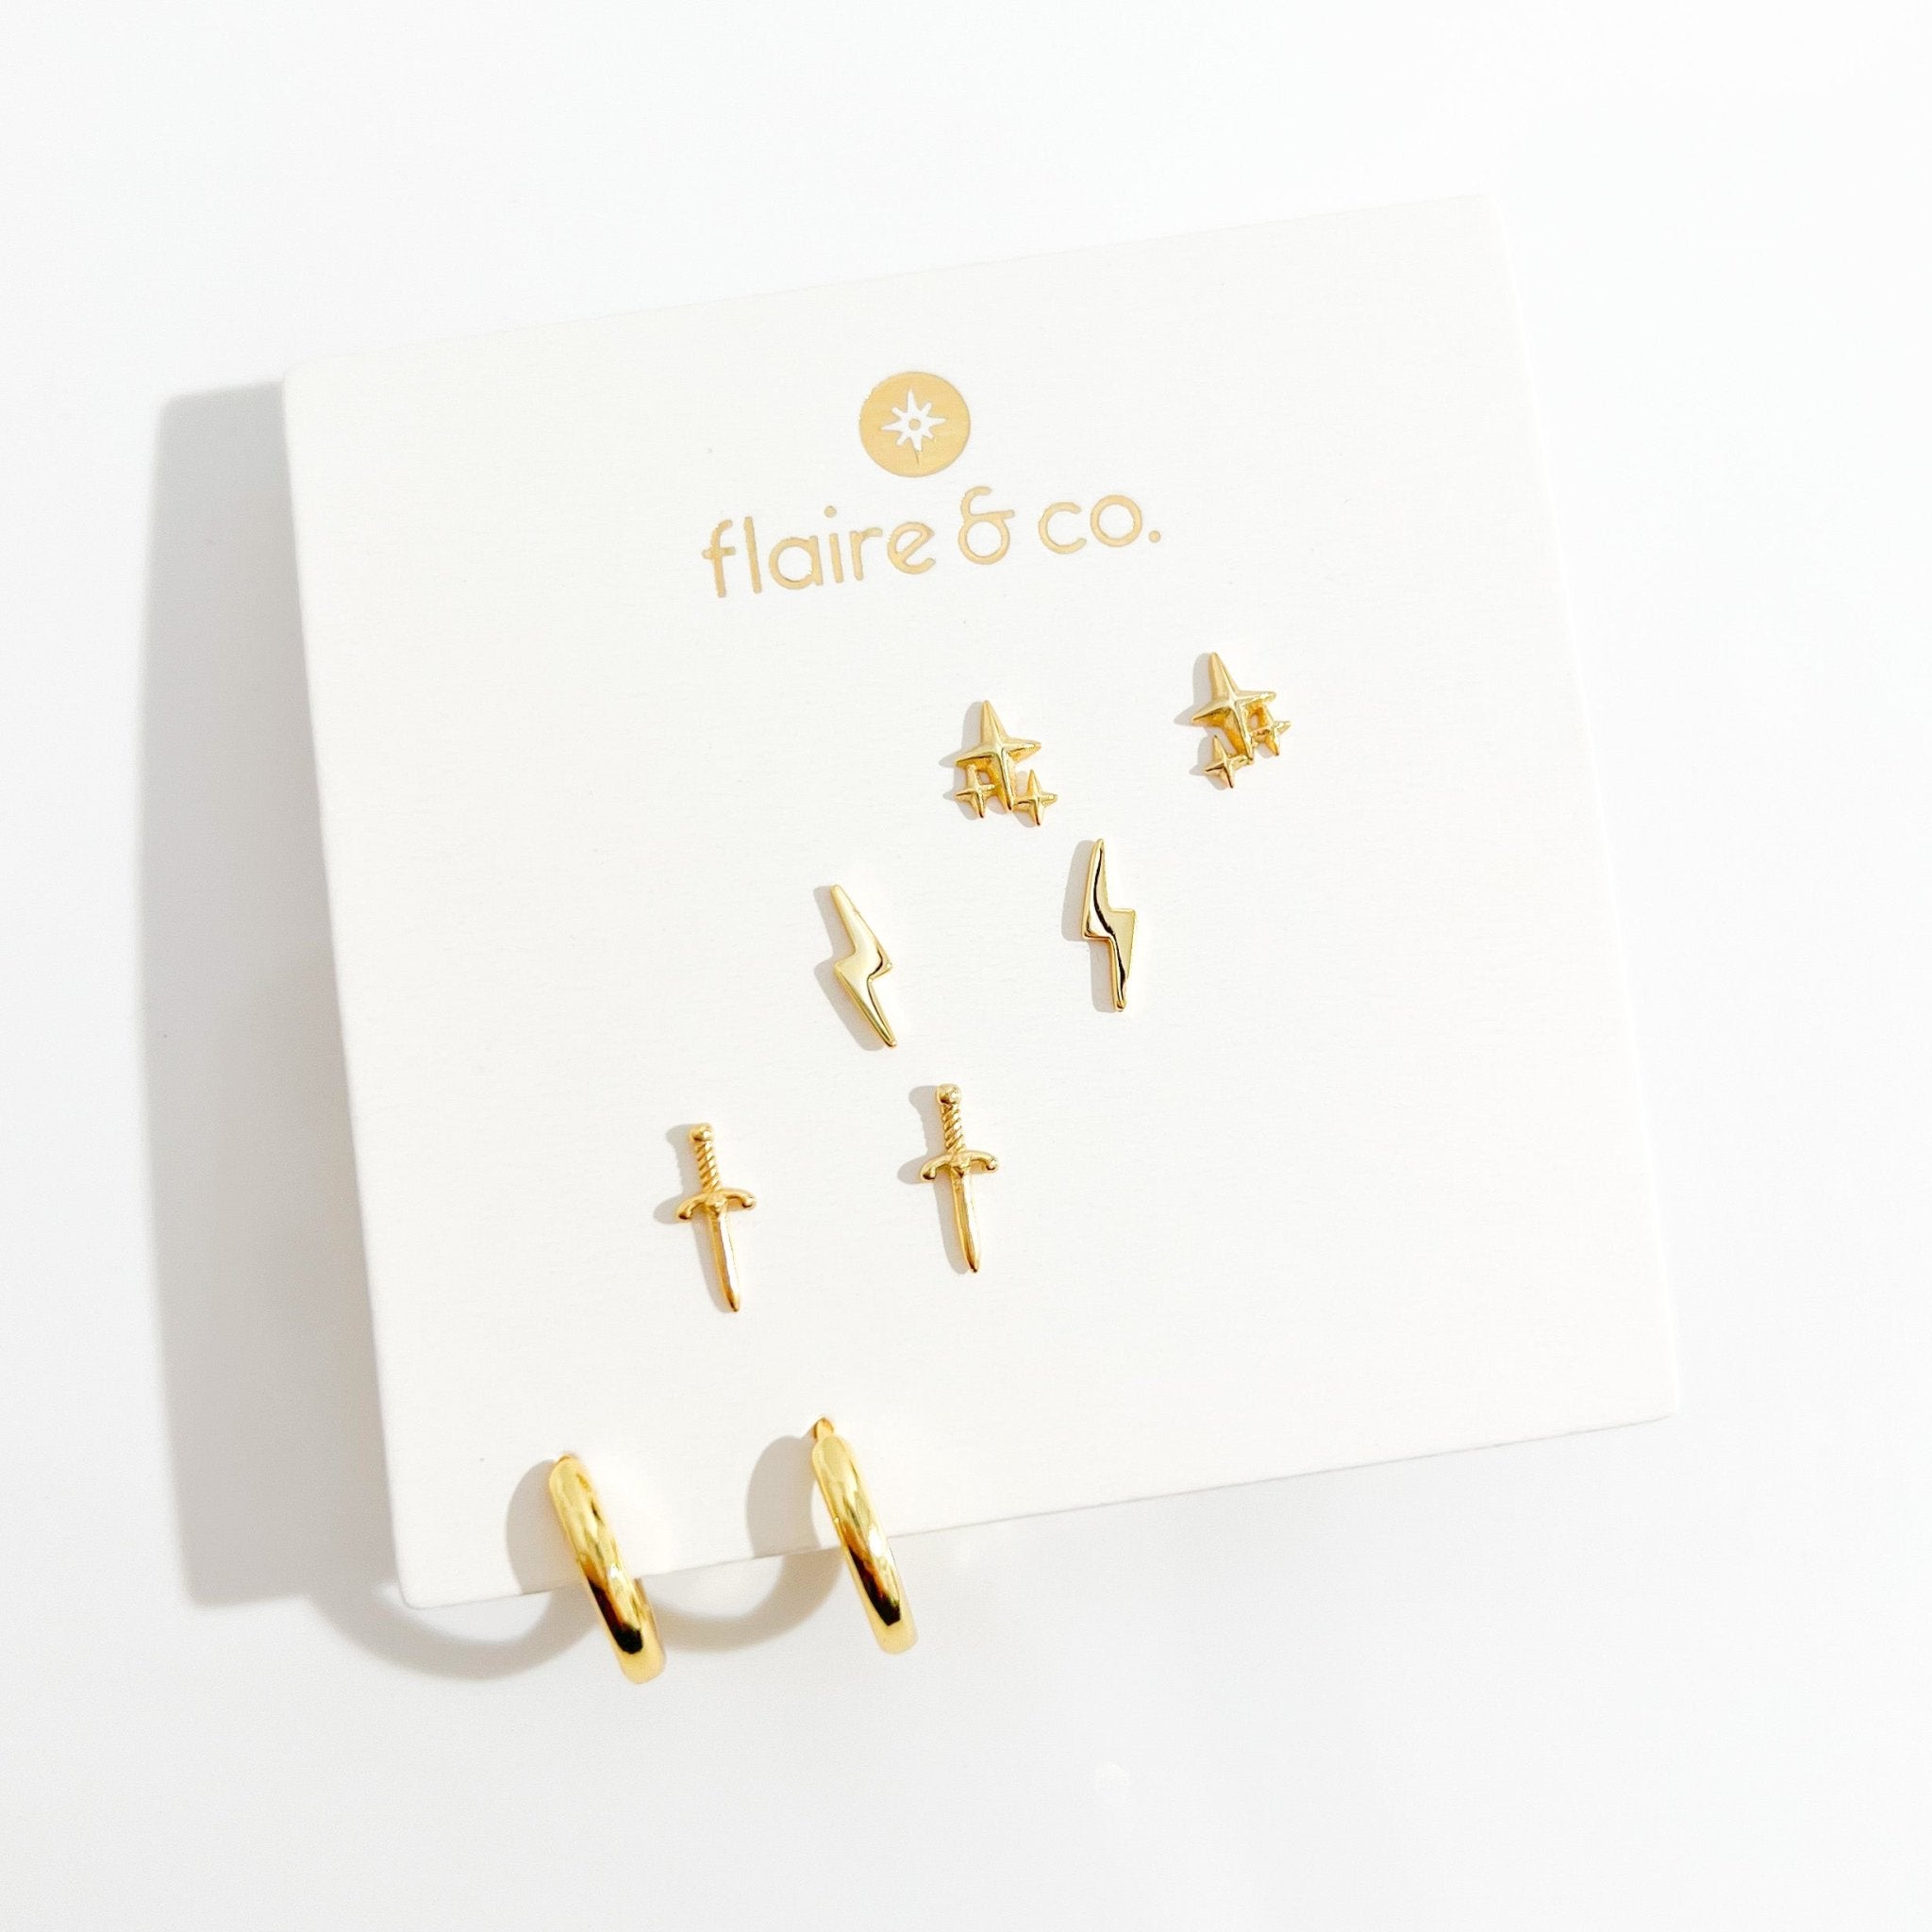 Staple Earrings Gold Bundle - Flaire & Co.